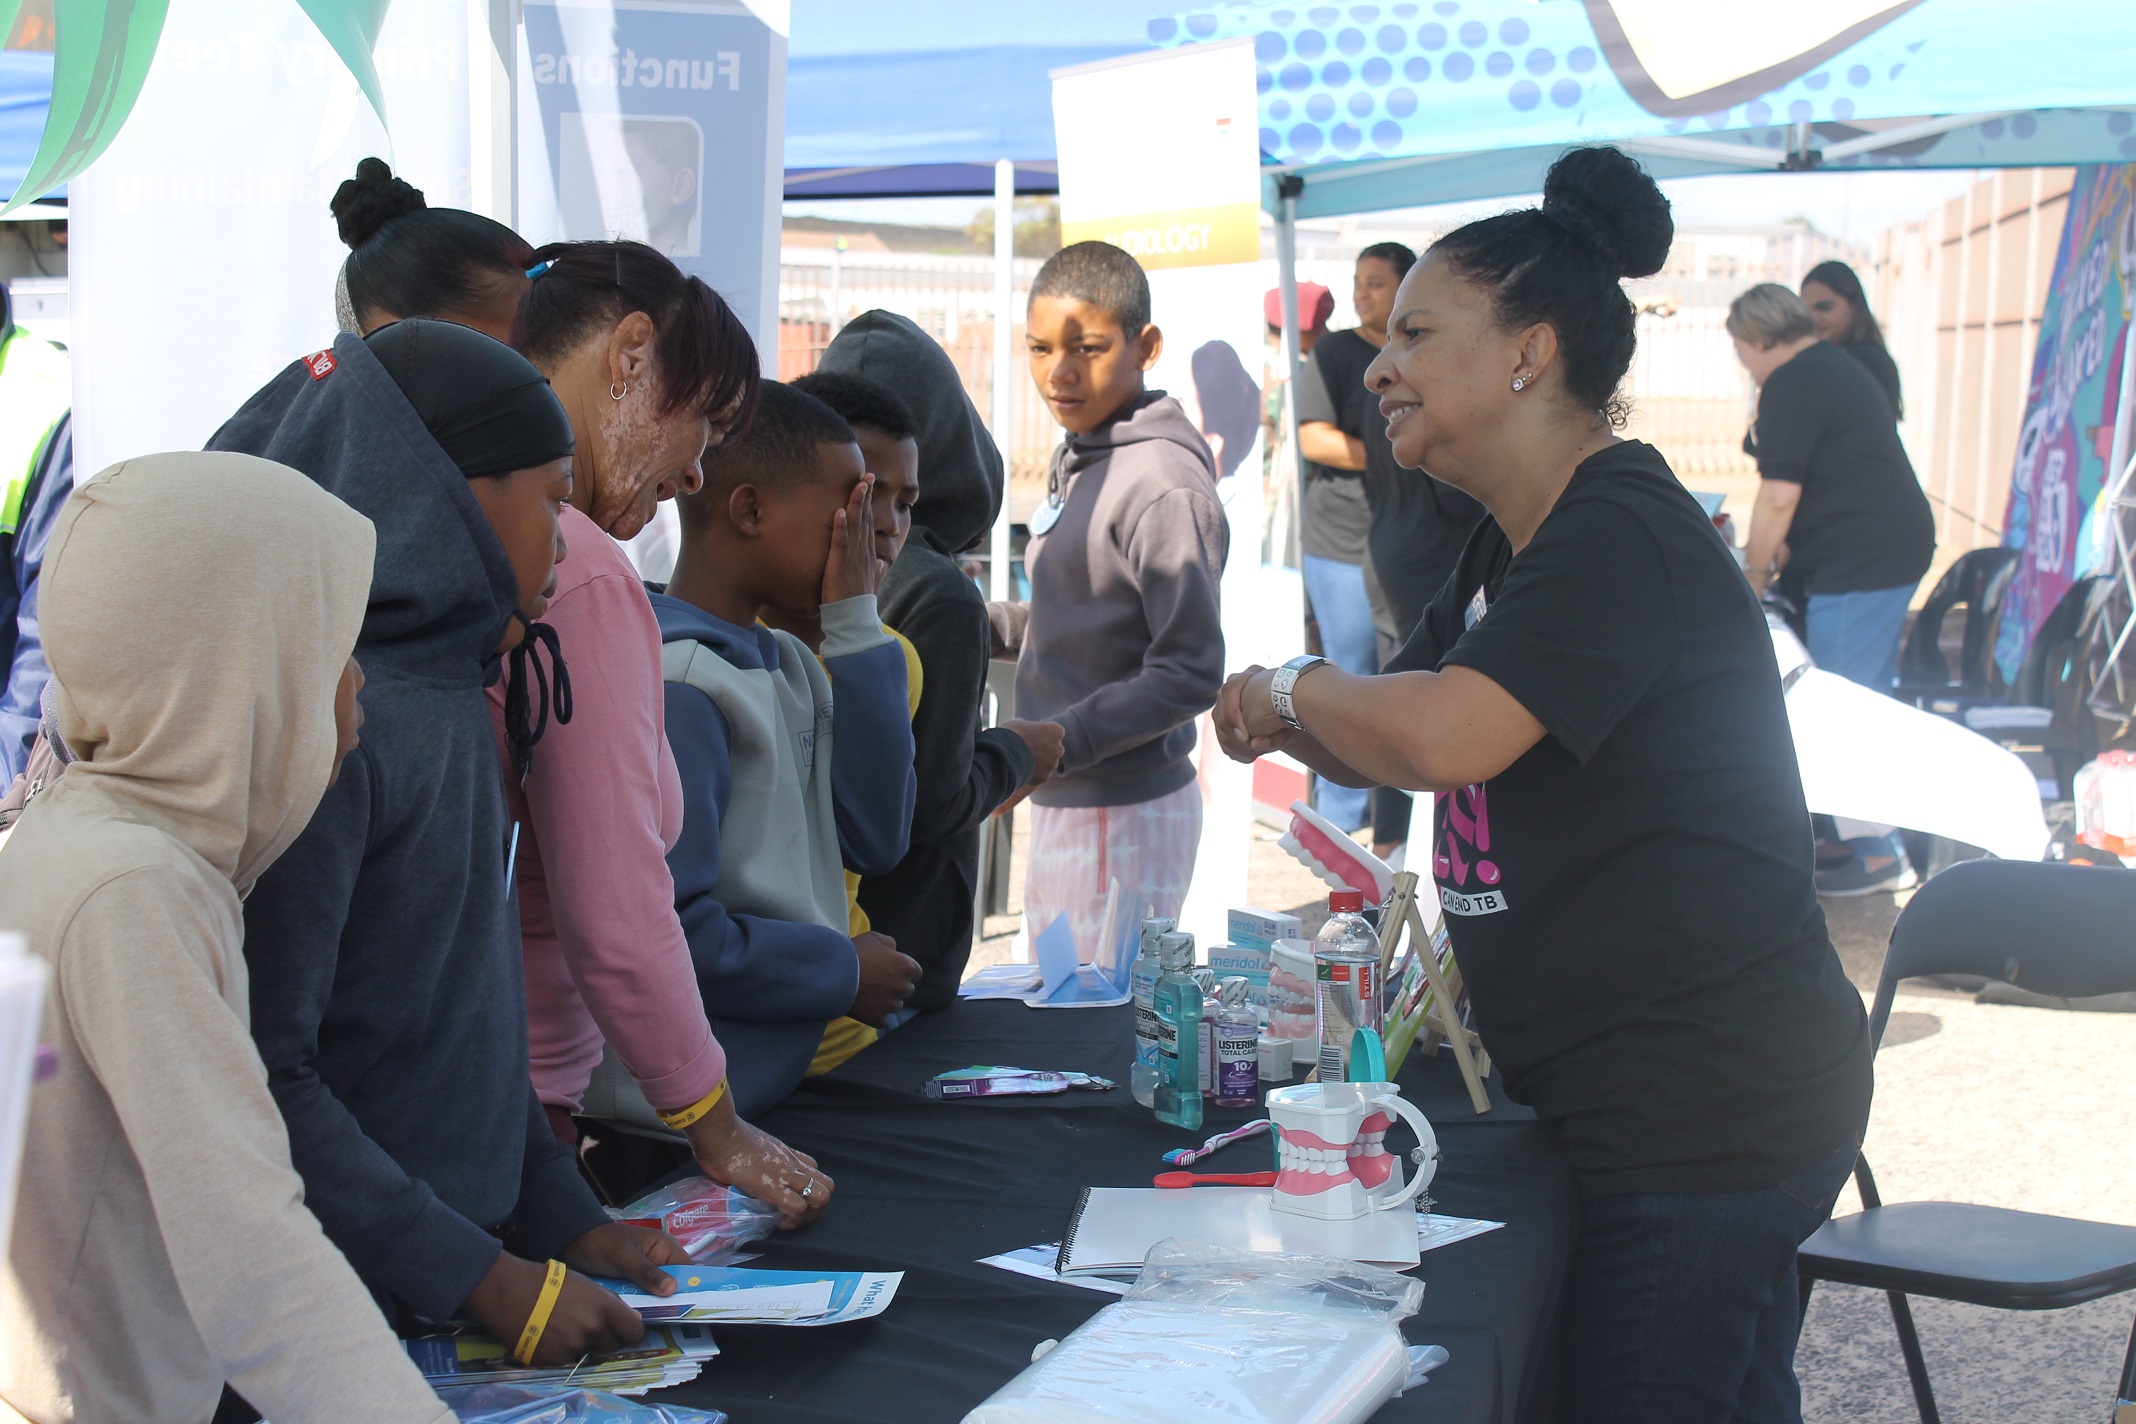 Tuberculosis Day event in Louwville